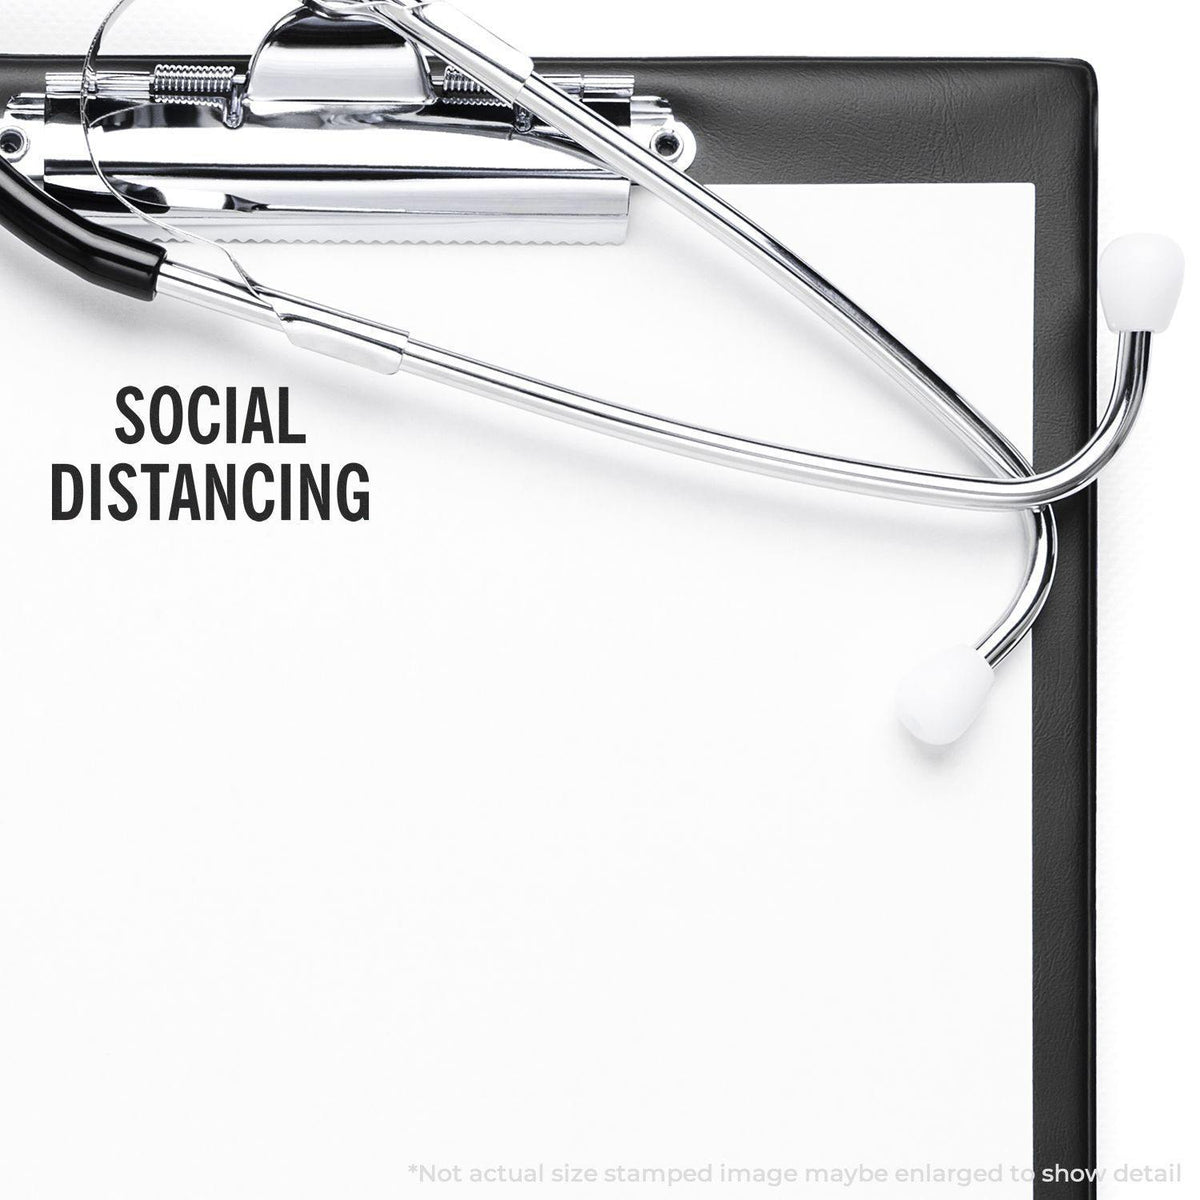 In Use Social Distancing Rubber Stamp Image